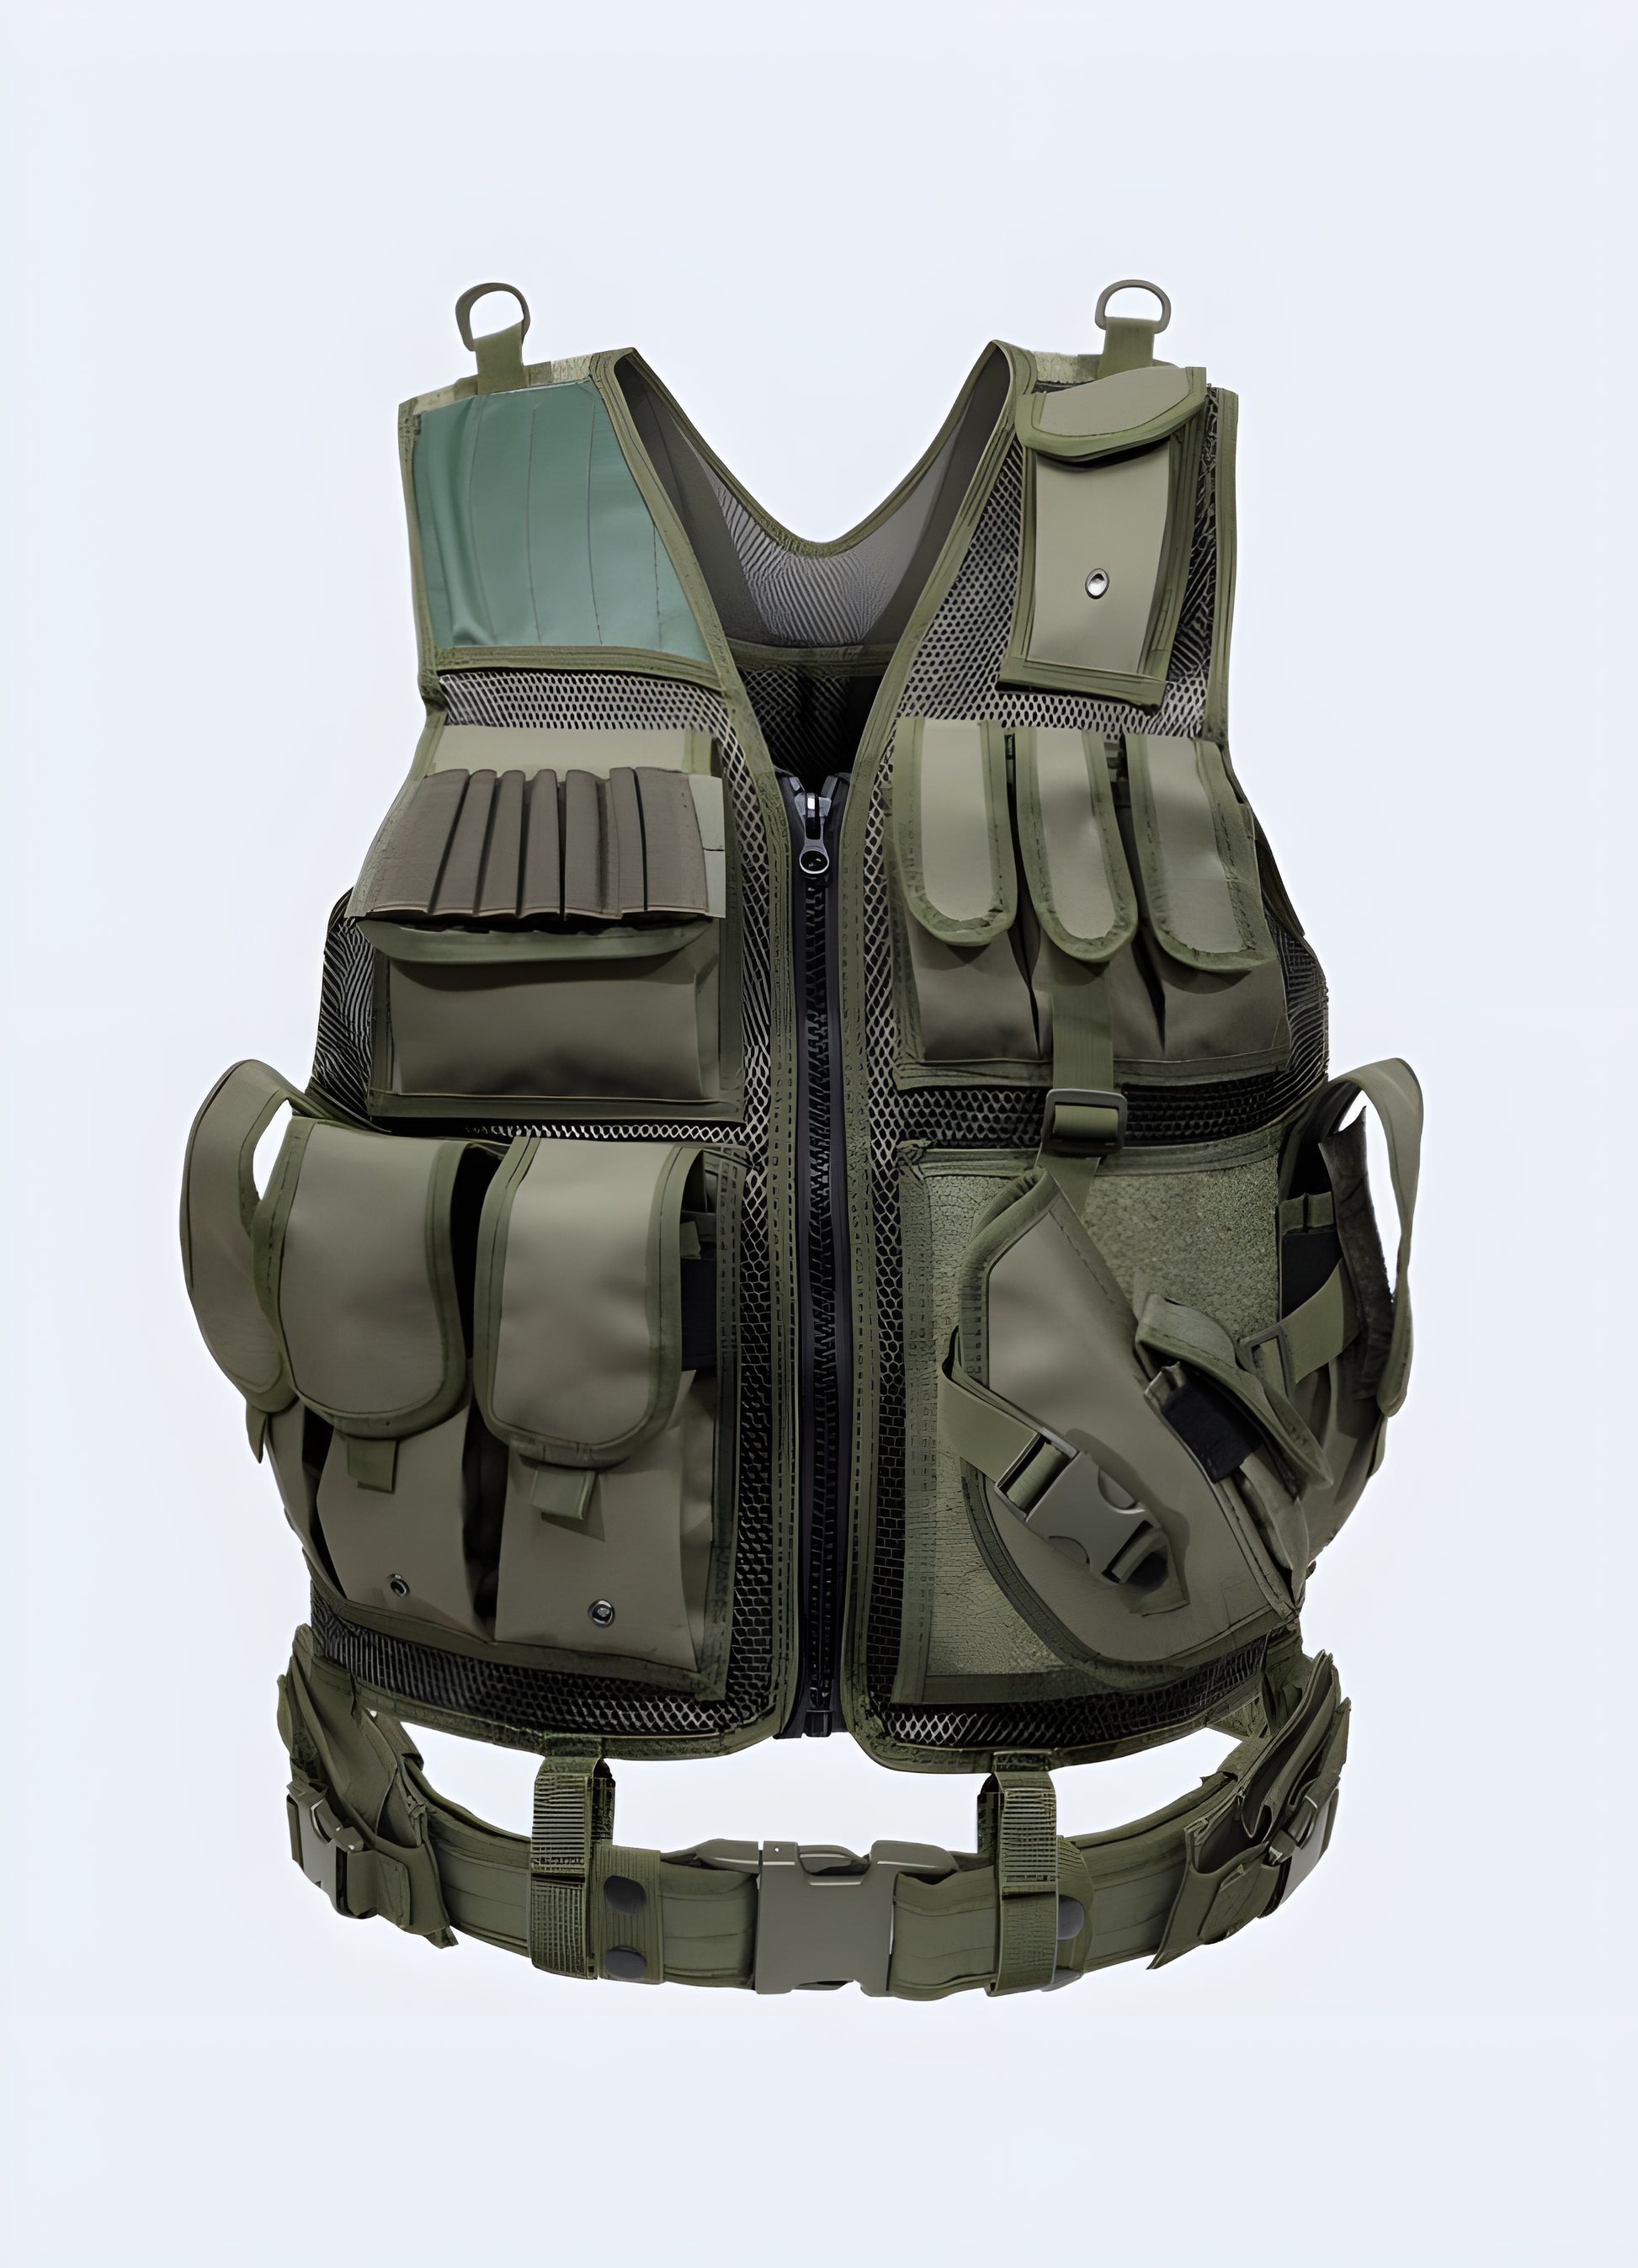 This bulletproof vest integrates comfort features with advanced protection.